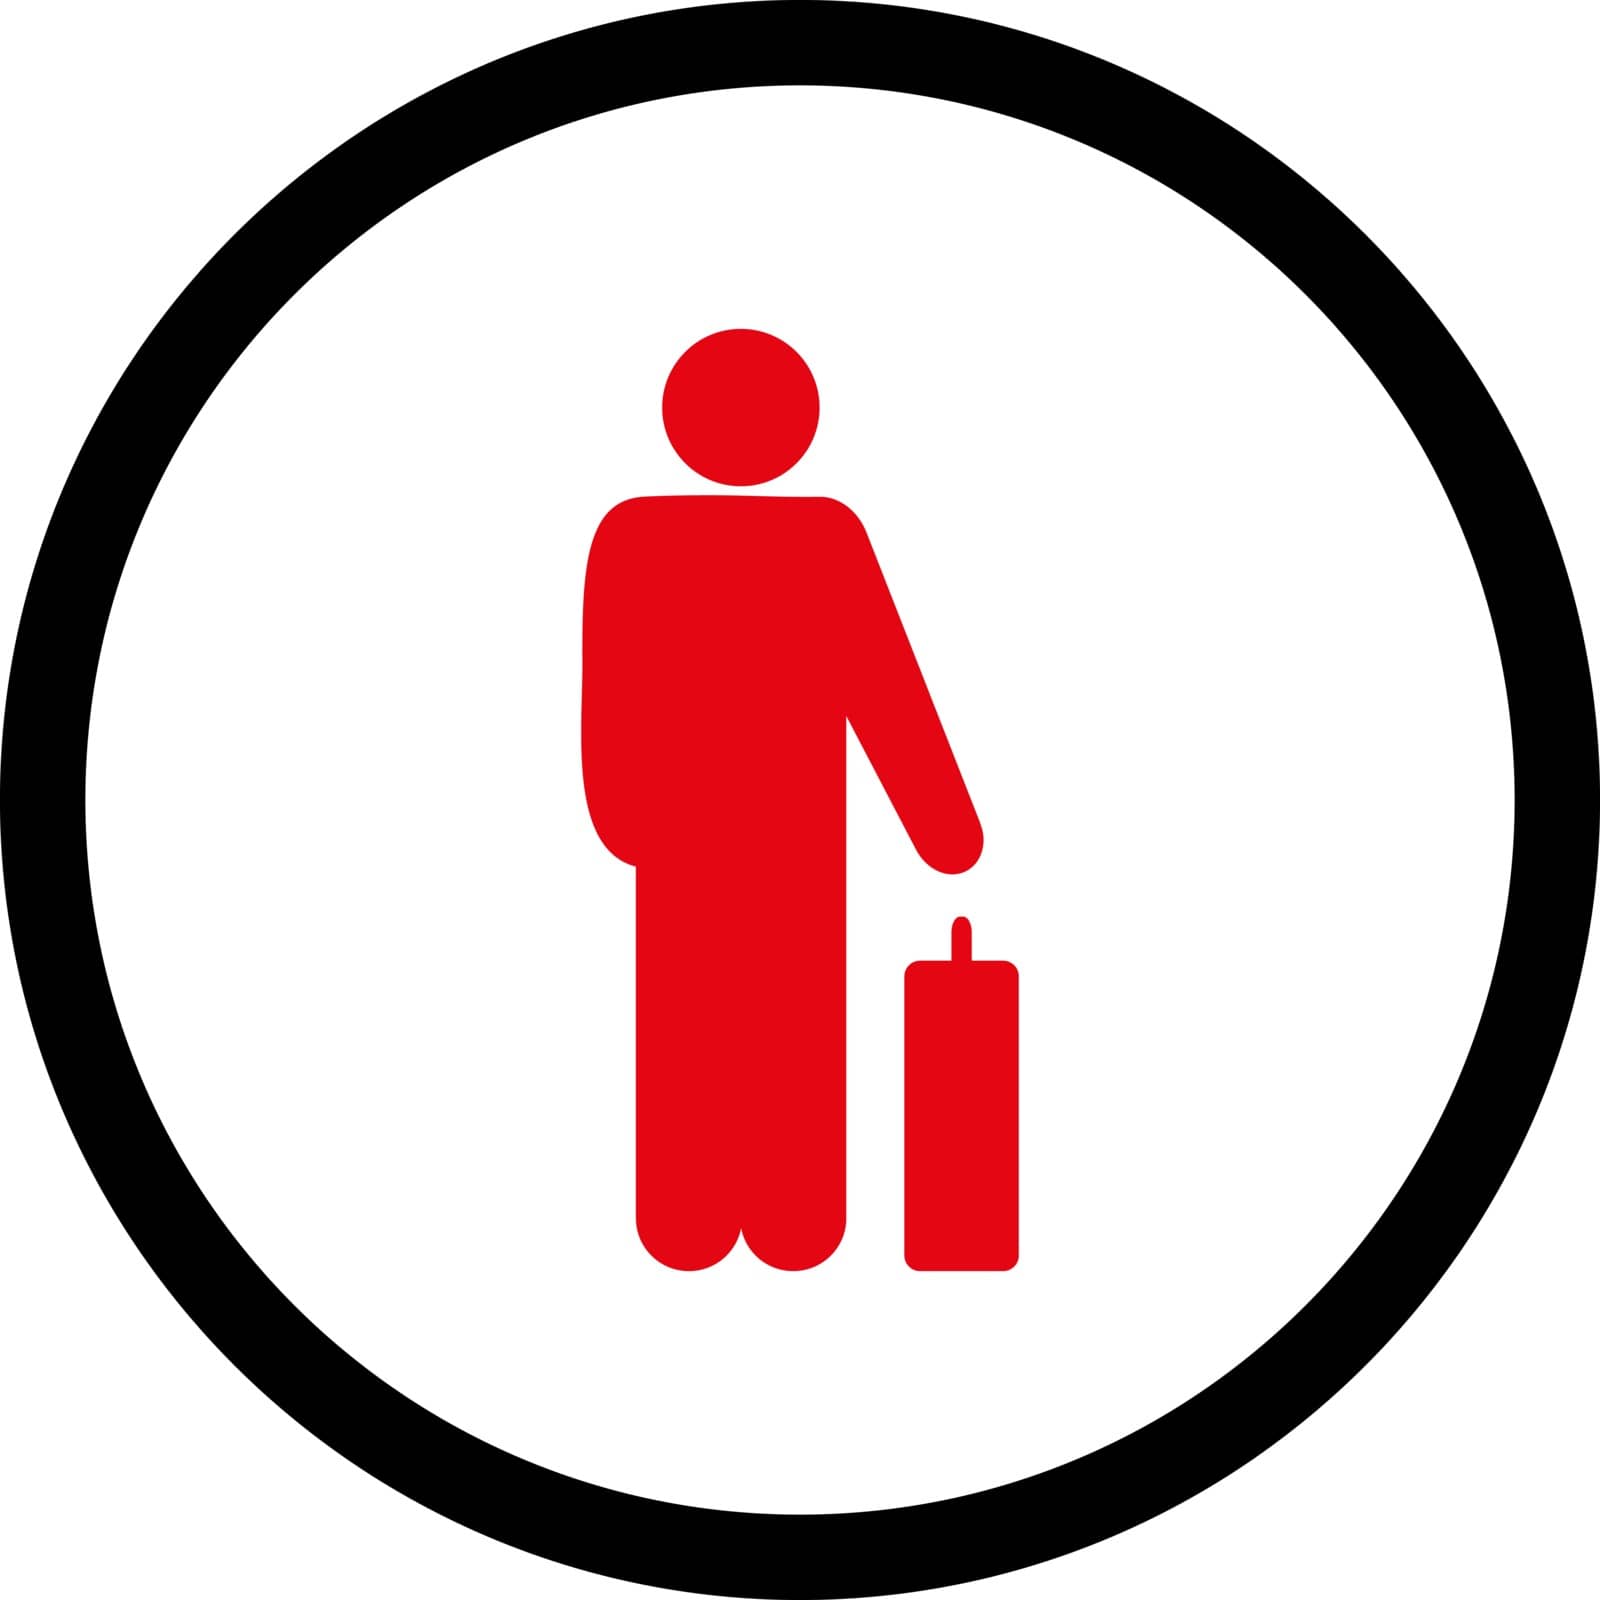 Passenger vector icon. This rounded flat symbol is drawn with intensive red and black colors on a white background.